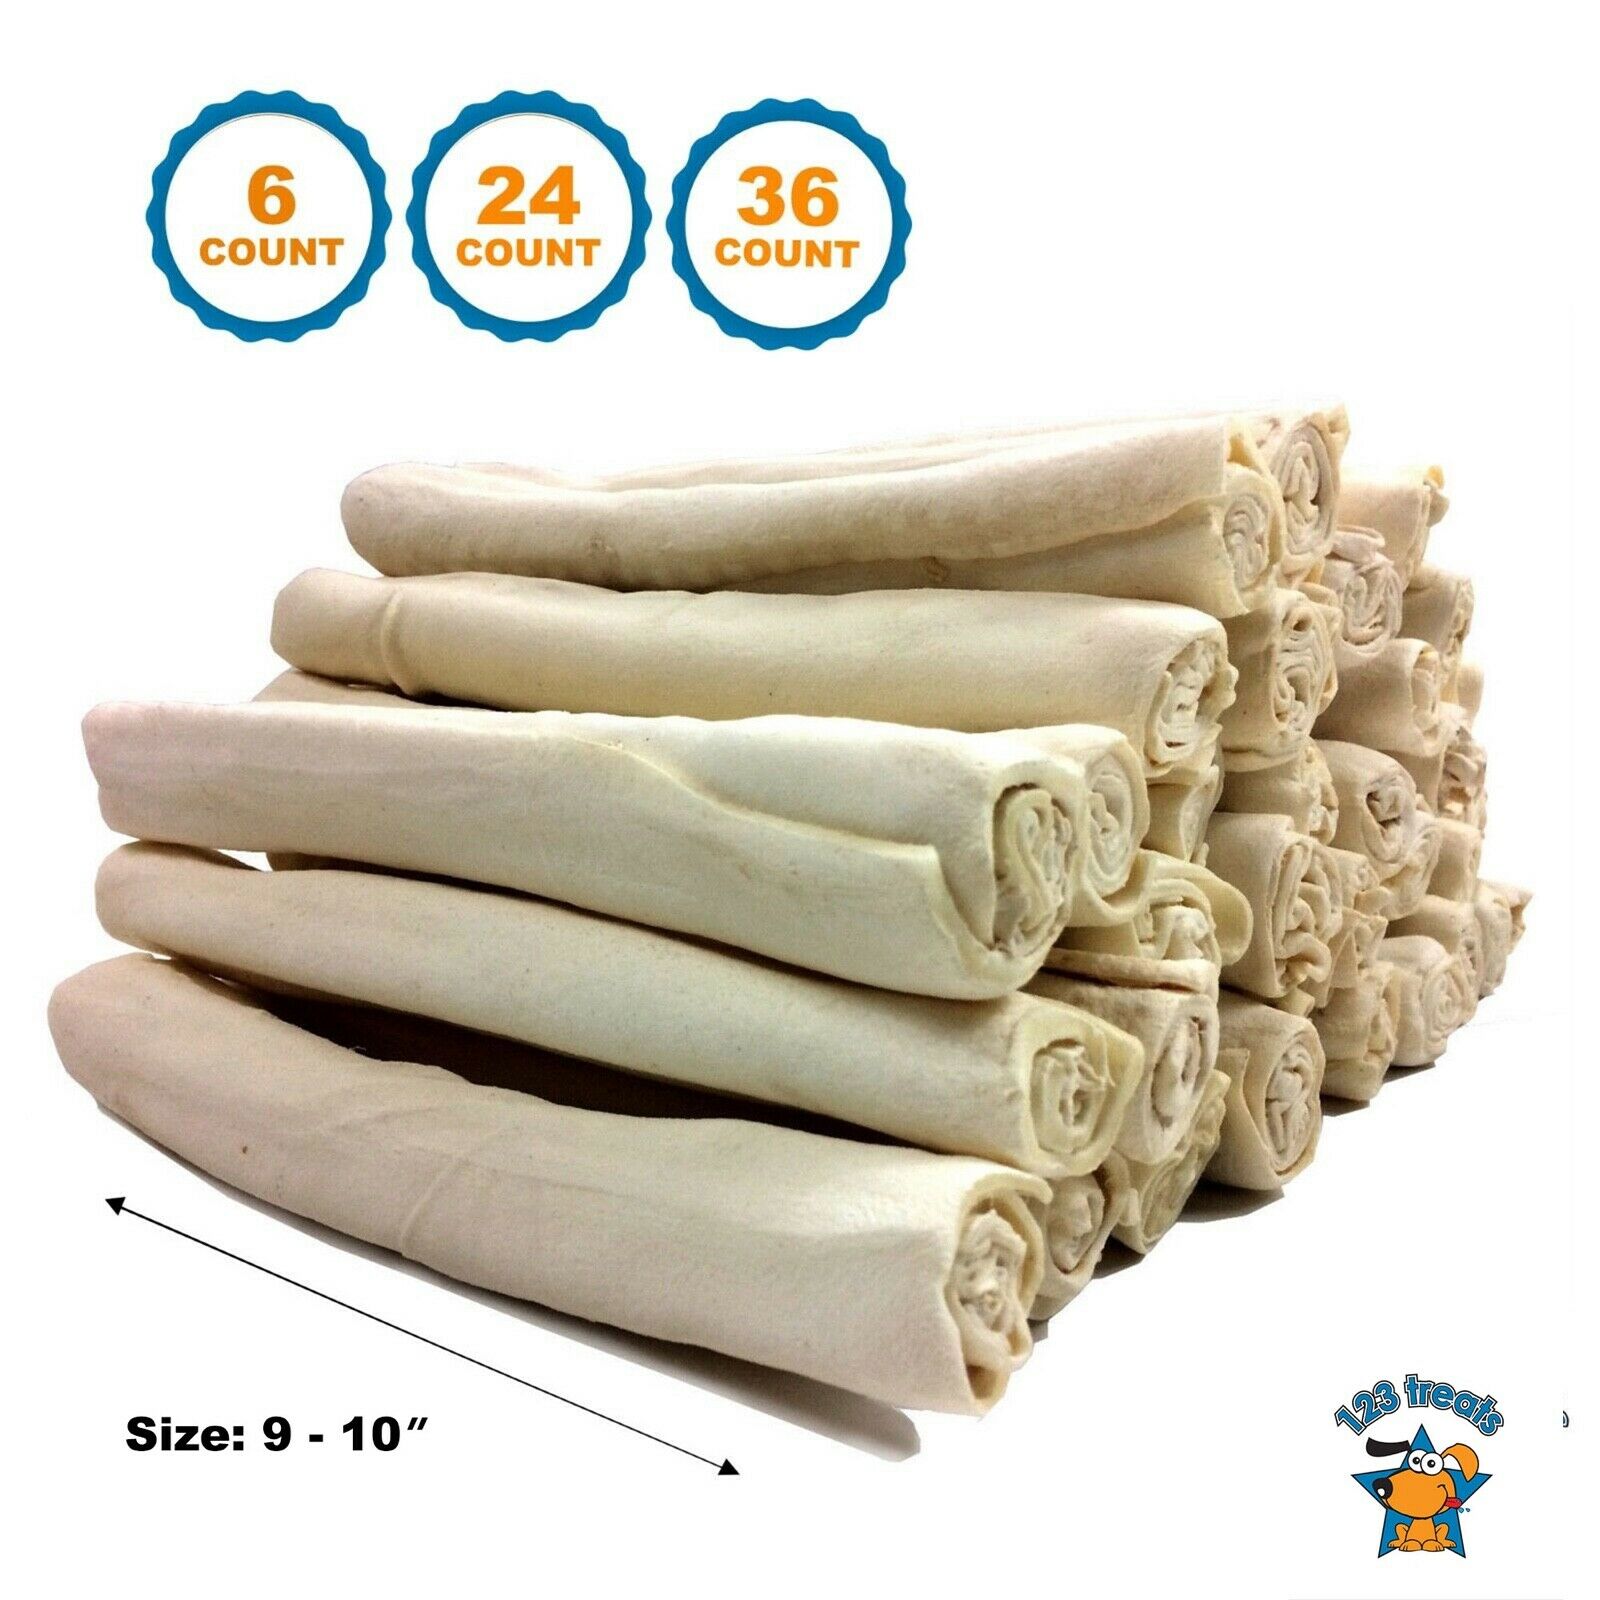 Rawhide Retriever Roll 9-10" -100% Natural Beef-hide Rolls For Dogs - 123 Treats